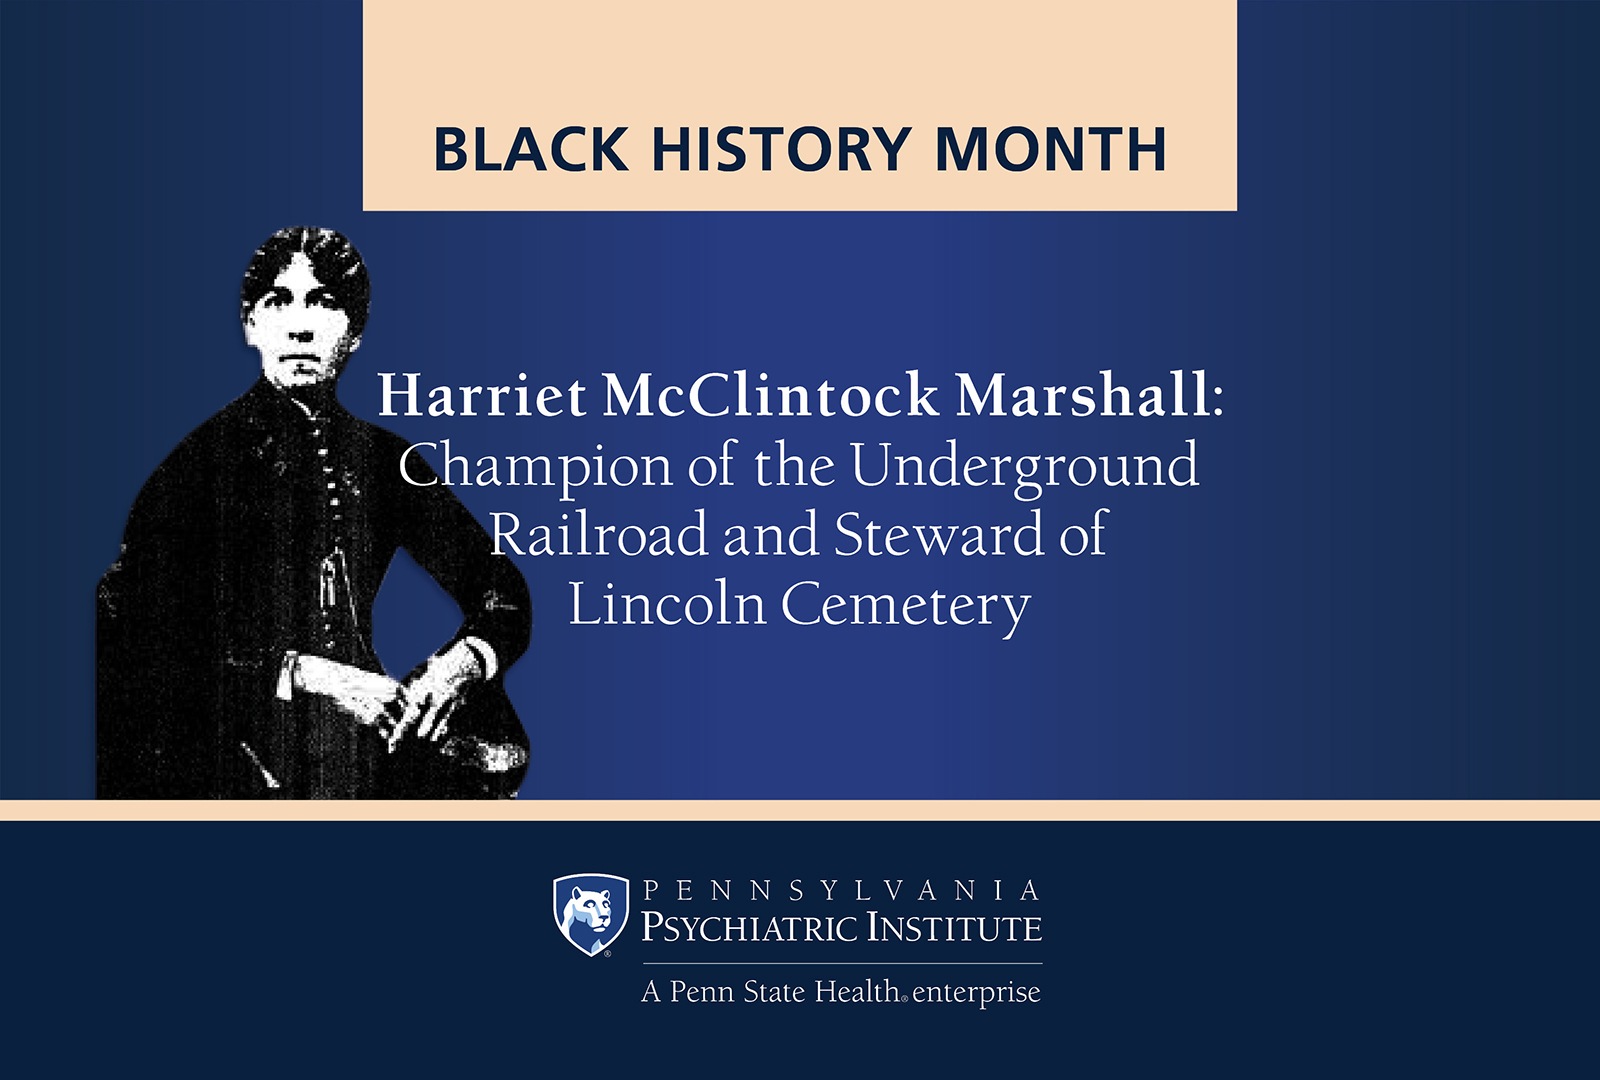 Black History Month. Harriet McClintock Marshall: Champion of the Underground Railroad and Steward of Lincoln Cemetery